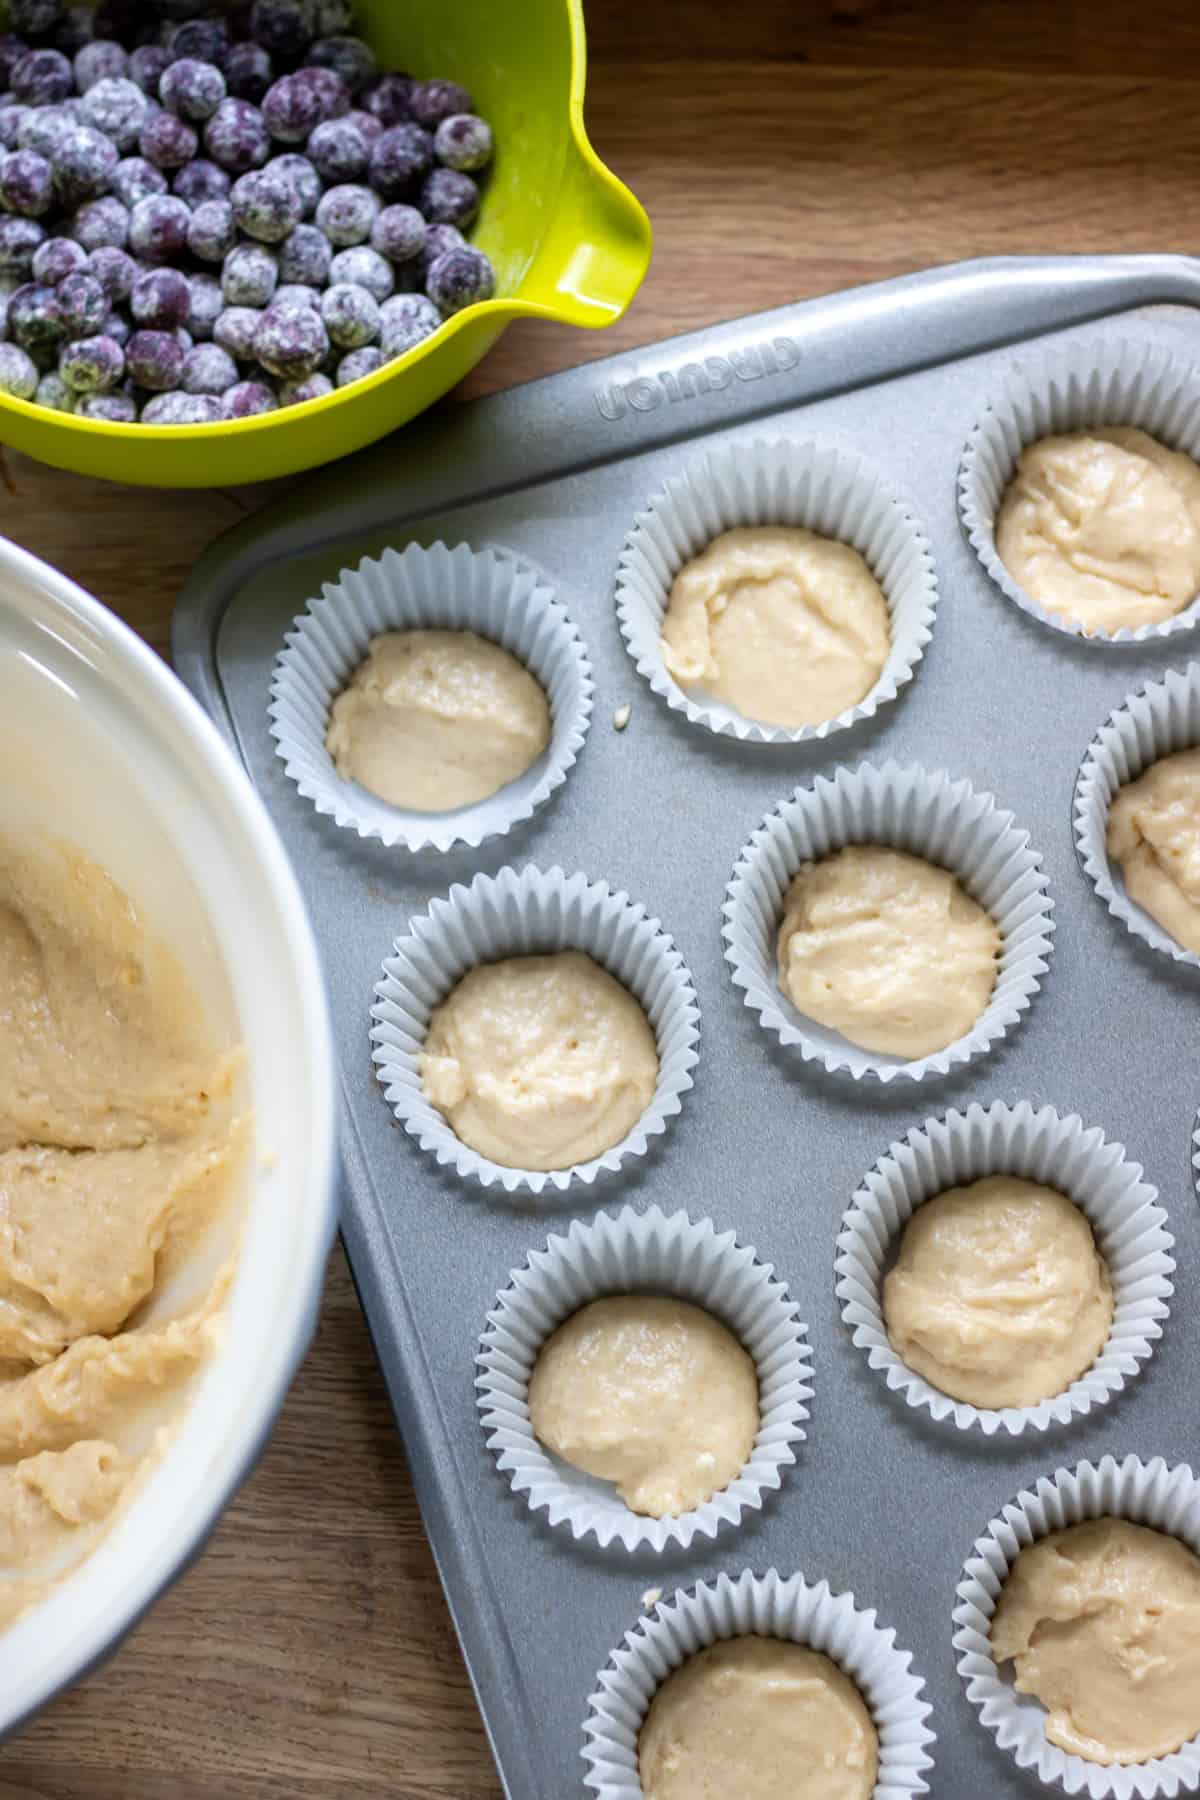 A little batter put into the muffin cases, before mixing the blueberries in, to prevent them from sinking.